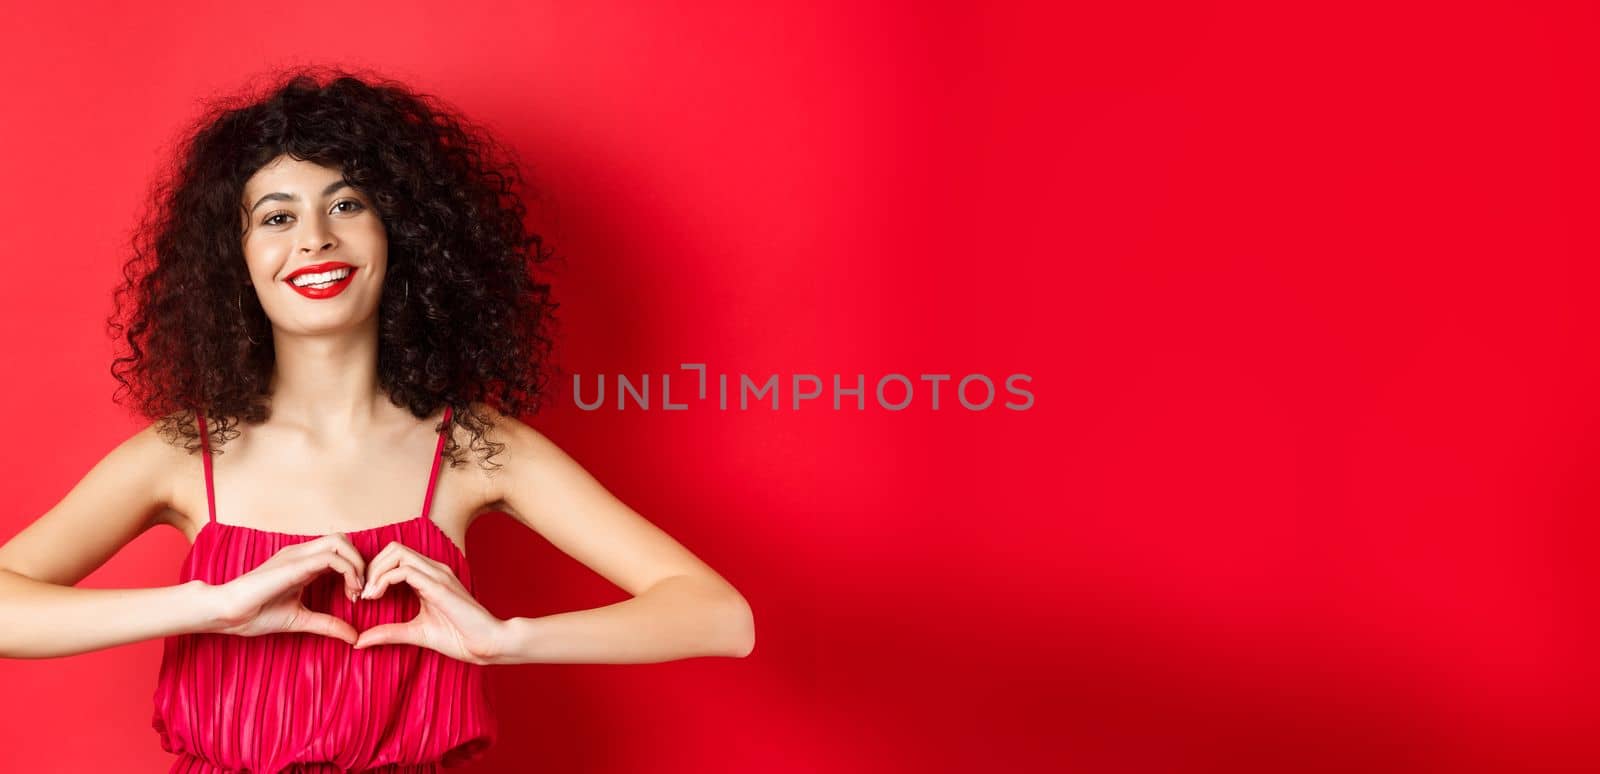 Lovers day. Beautiful woman celebrating valentines, showing heart sign and smiling, standing in romantic red dress on studio background.